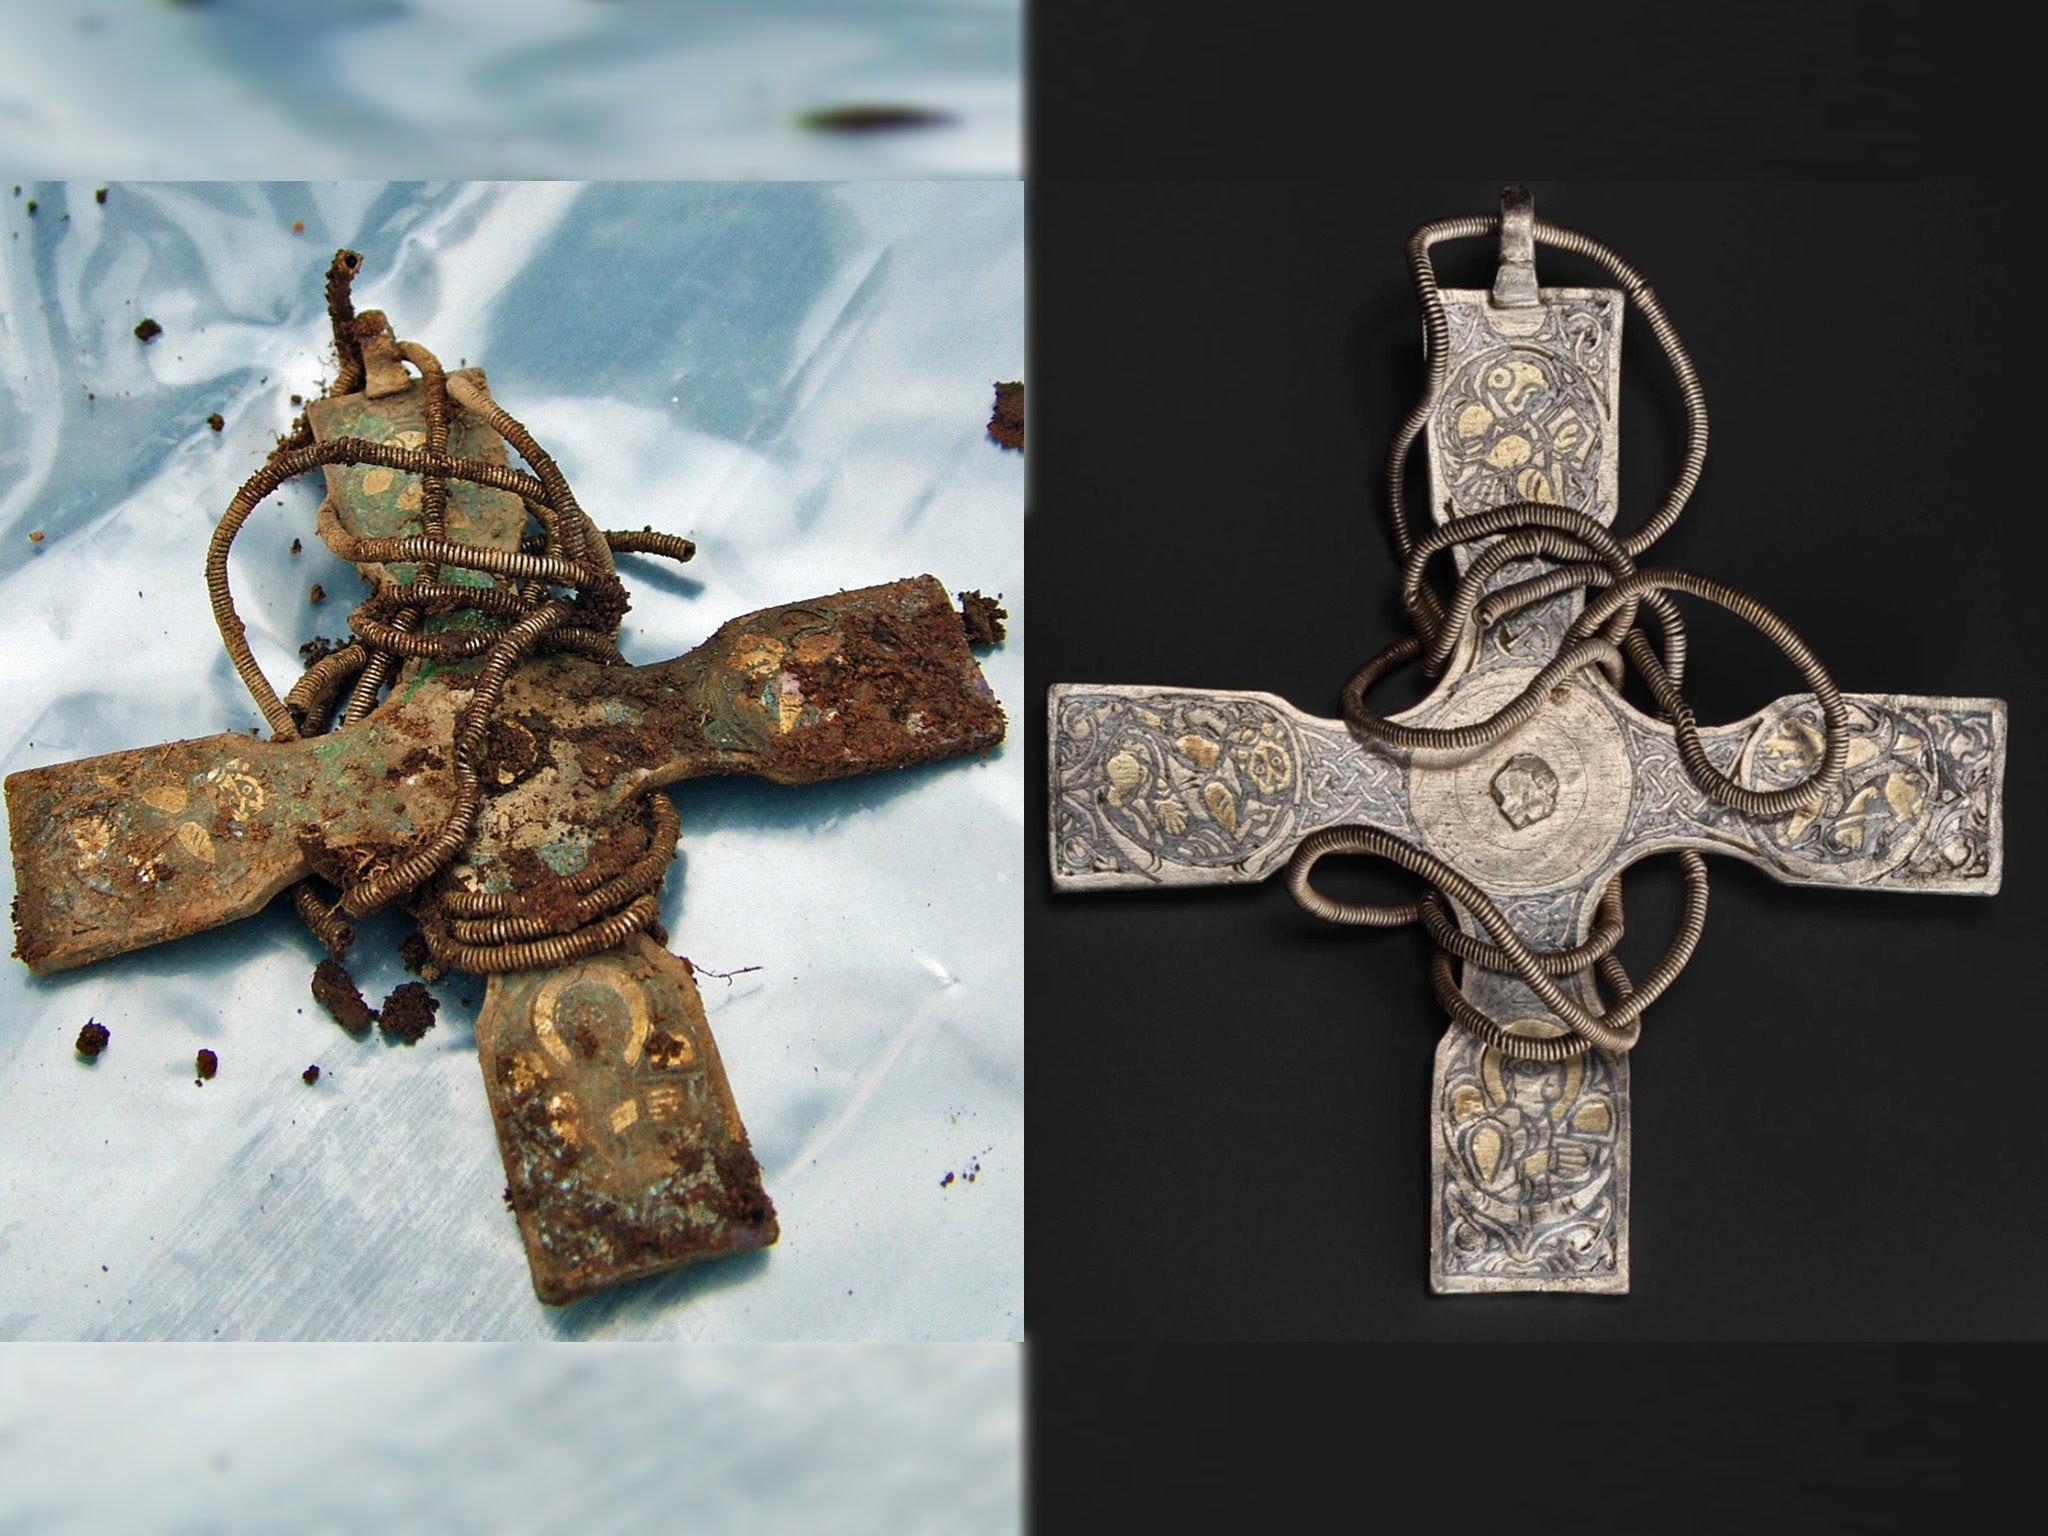 The Anglo-Saxon silver cross before and after an intricate conservation process removed 1,000 years of dirt